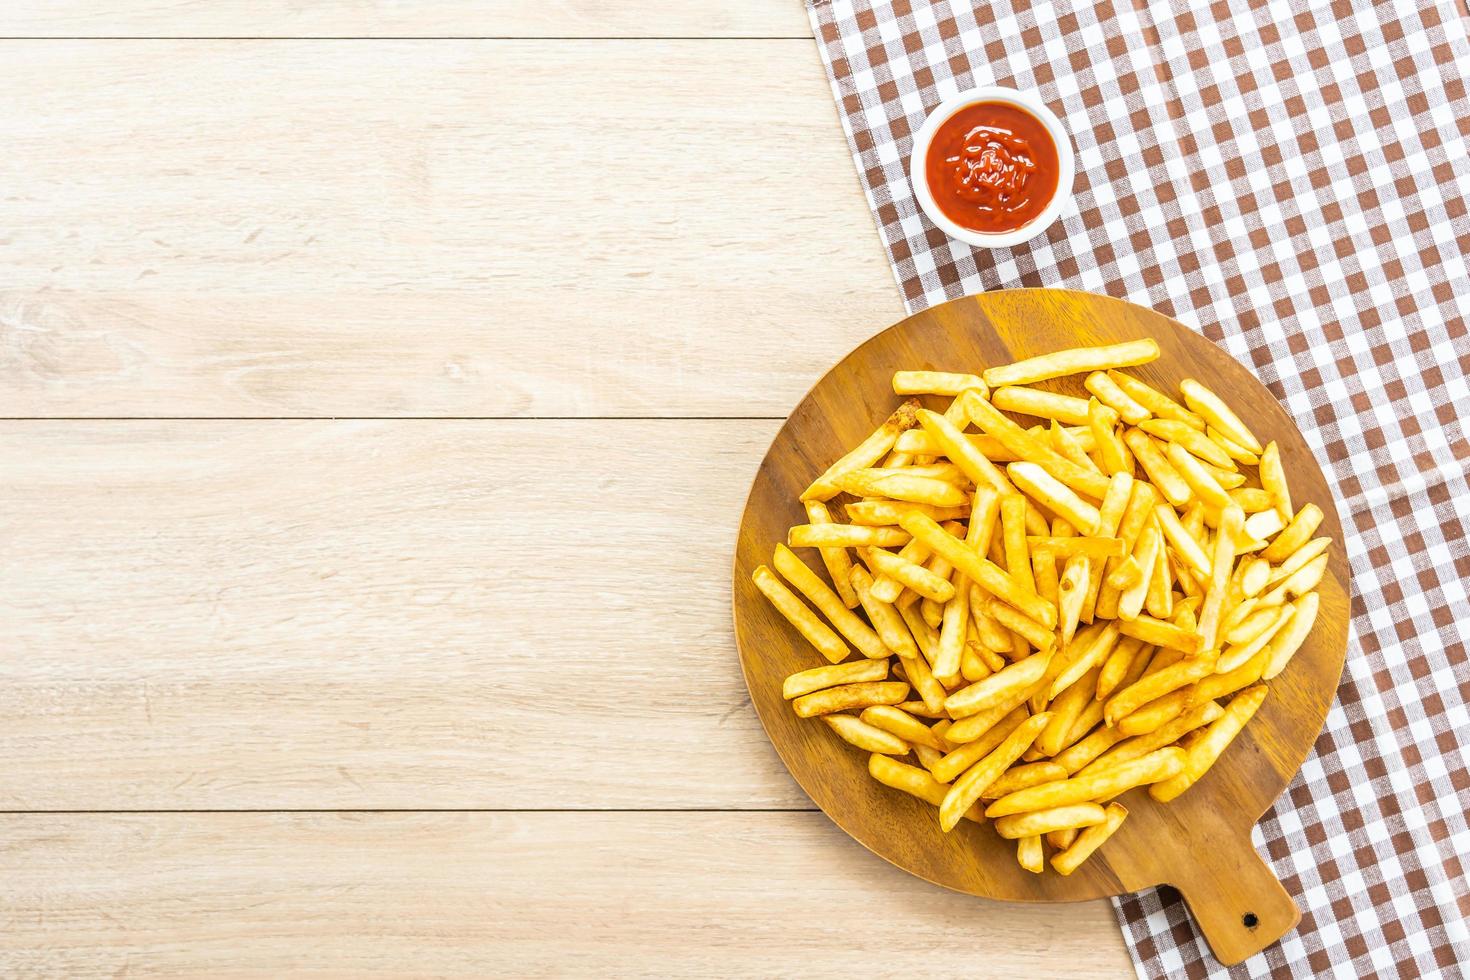 French fries with tomato or ketchup sauce photo